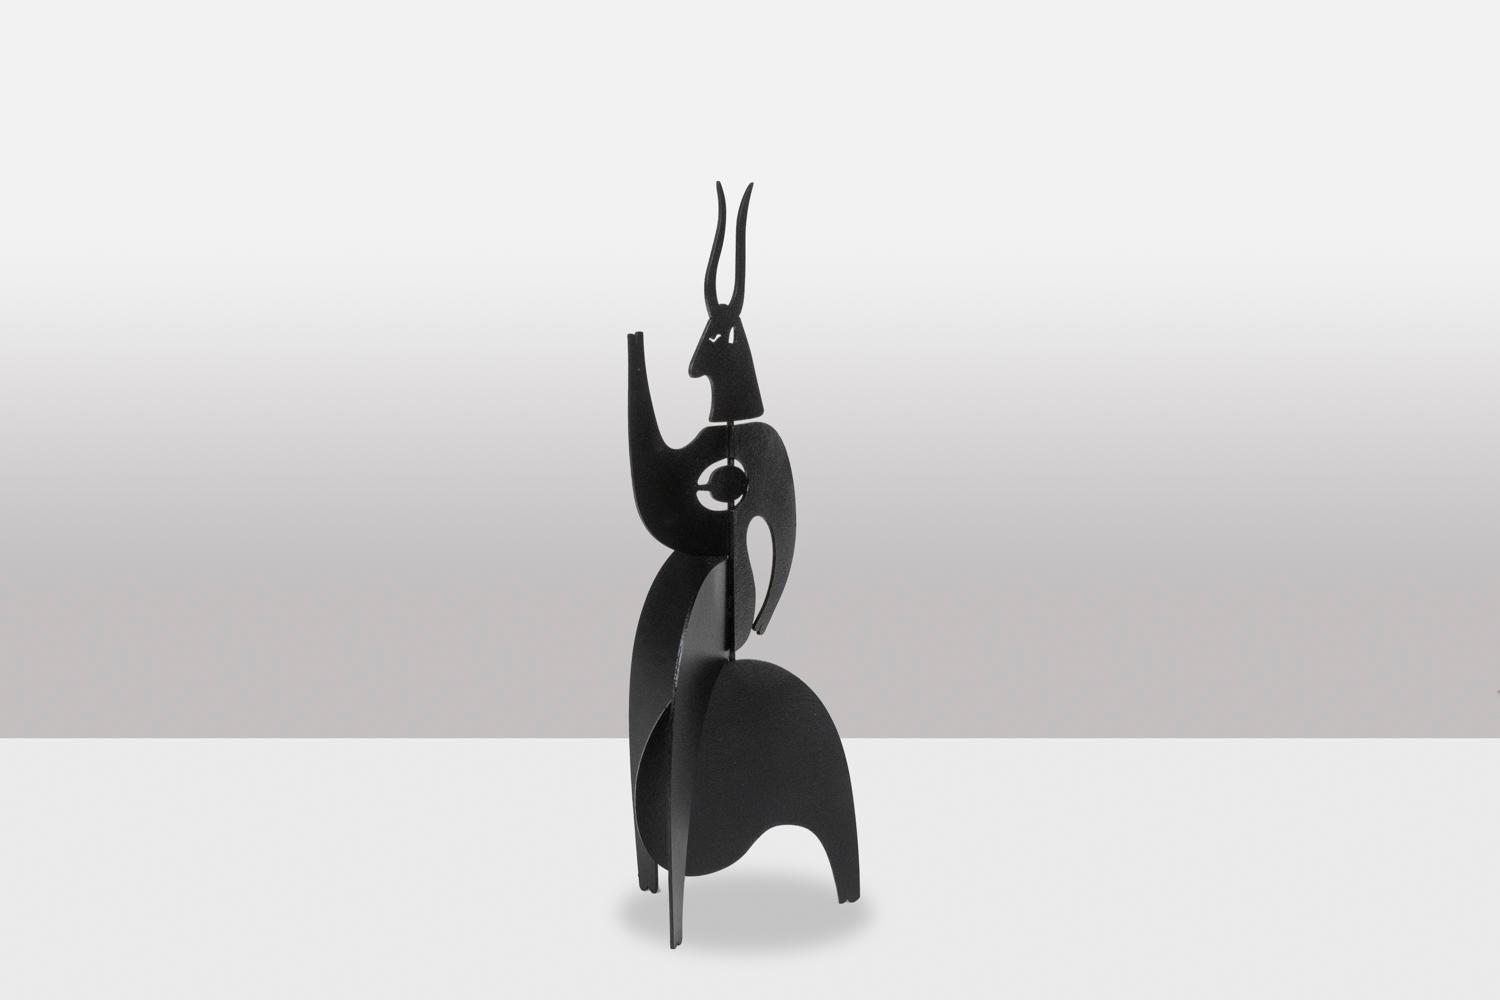 Sculpture to pose, or stabile, “Taurus” model, in black lacquered metal.

Dimensions: H 50 x D 20 cm

Contemporary artist’s work, signed and numbered.
